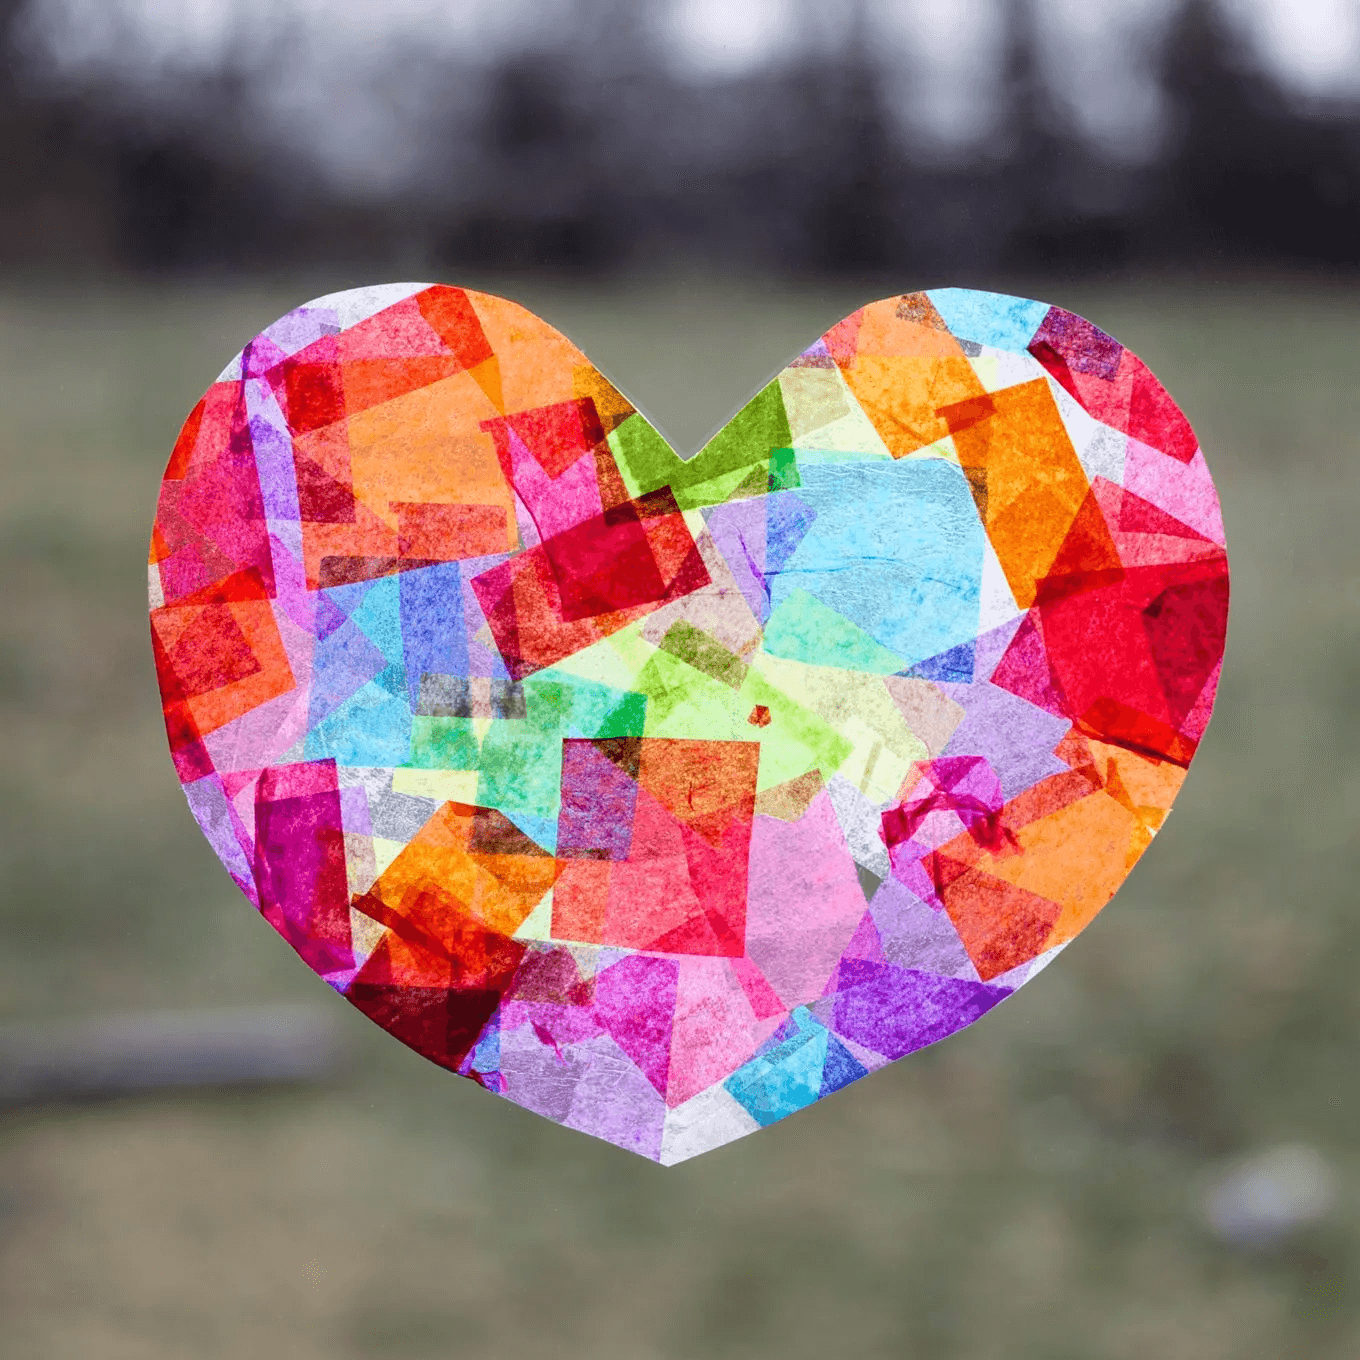 Colorful Heart Suncatcher Craft Tutorial With Tissue Paper